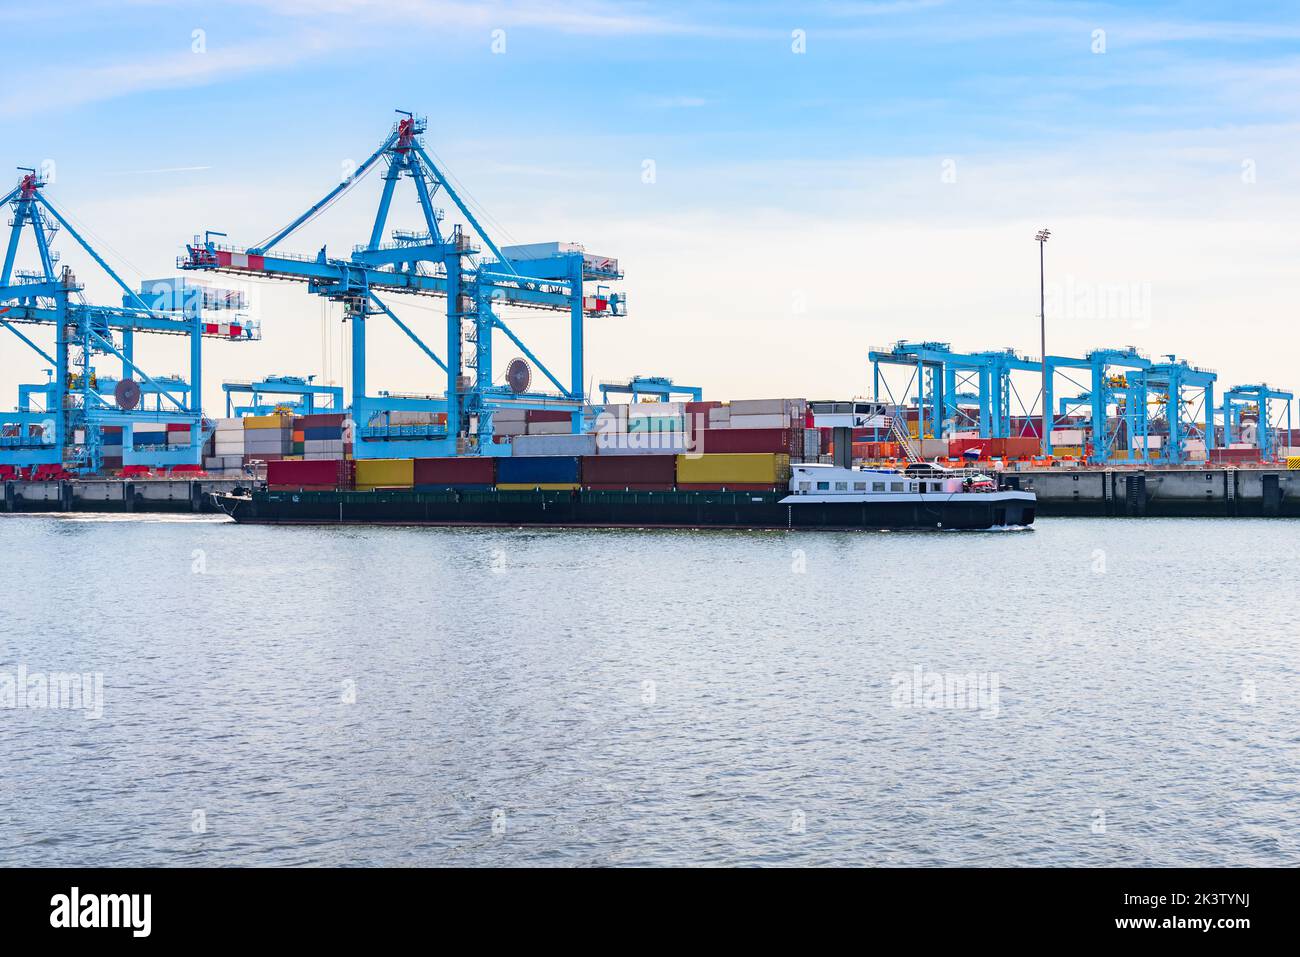 Cargo barge loaded with colourful containers sailing past a comercial dock with tall gantry cranes and stacks of containers Stock Photo